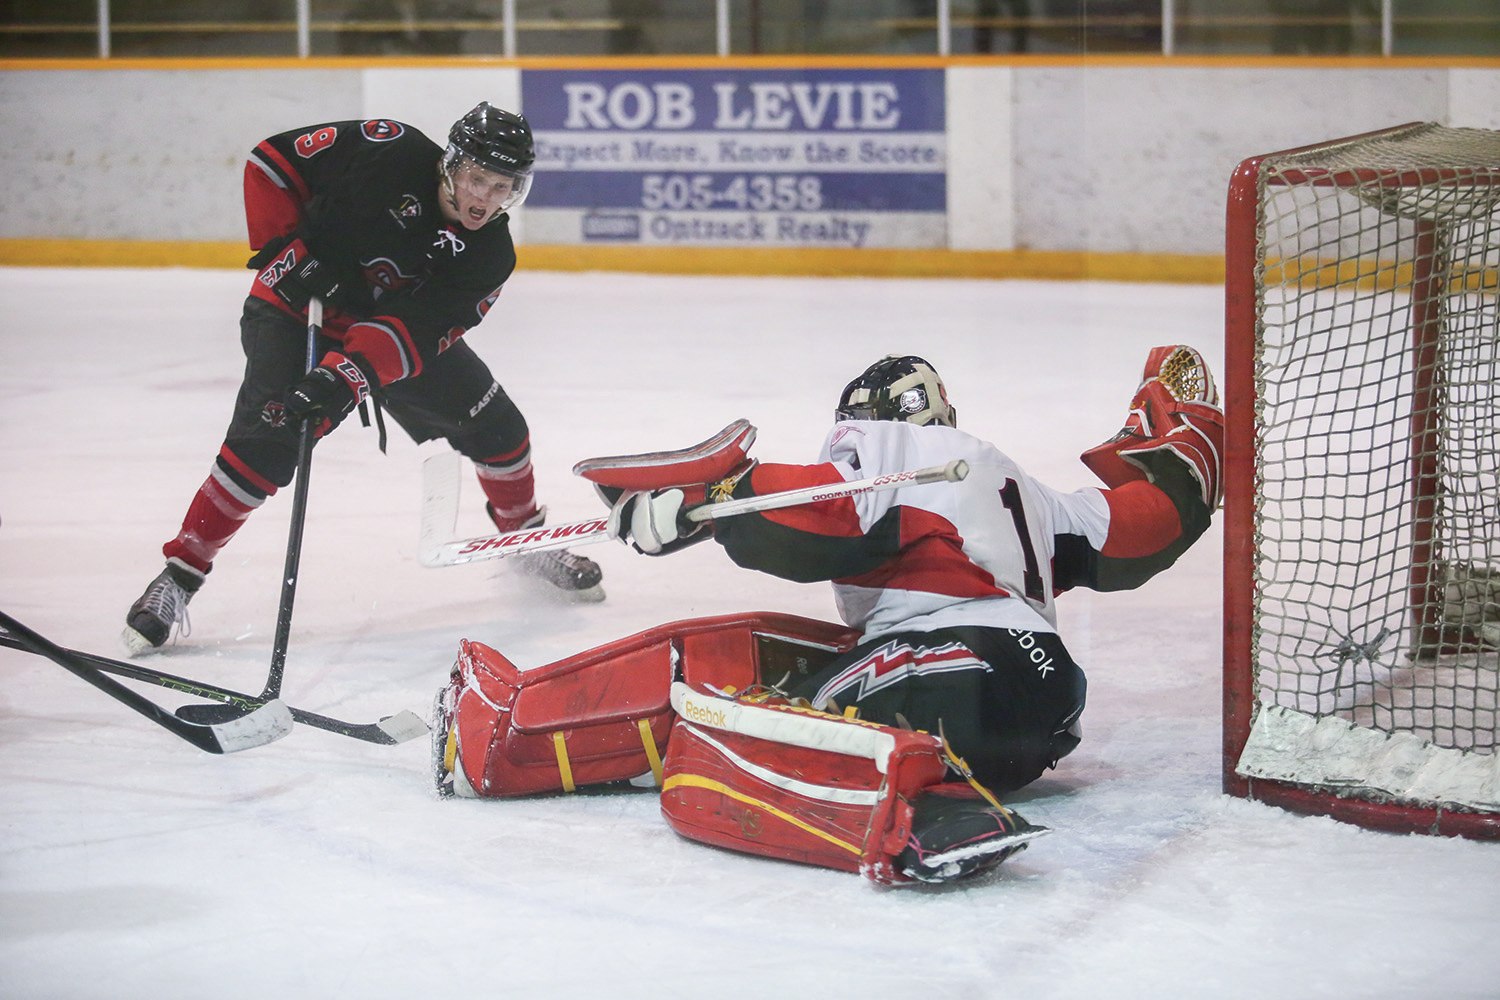 BIG SAVE - Tye Munro of the Red Deer Vipers tried to put the puck past Kade Taplin of the Airdrie Thunder during Heritage Junior Hockey League action at the Red Deer Arena last weekend. The Vipers toppled the league-leading Thunder 4-3 in overtime.